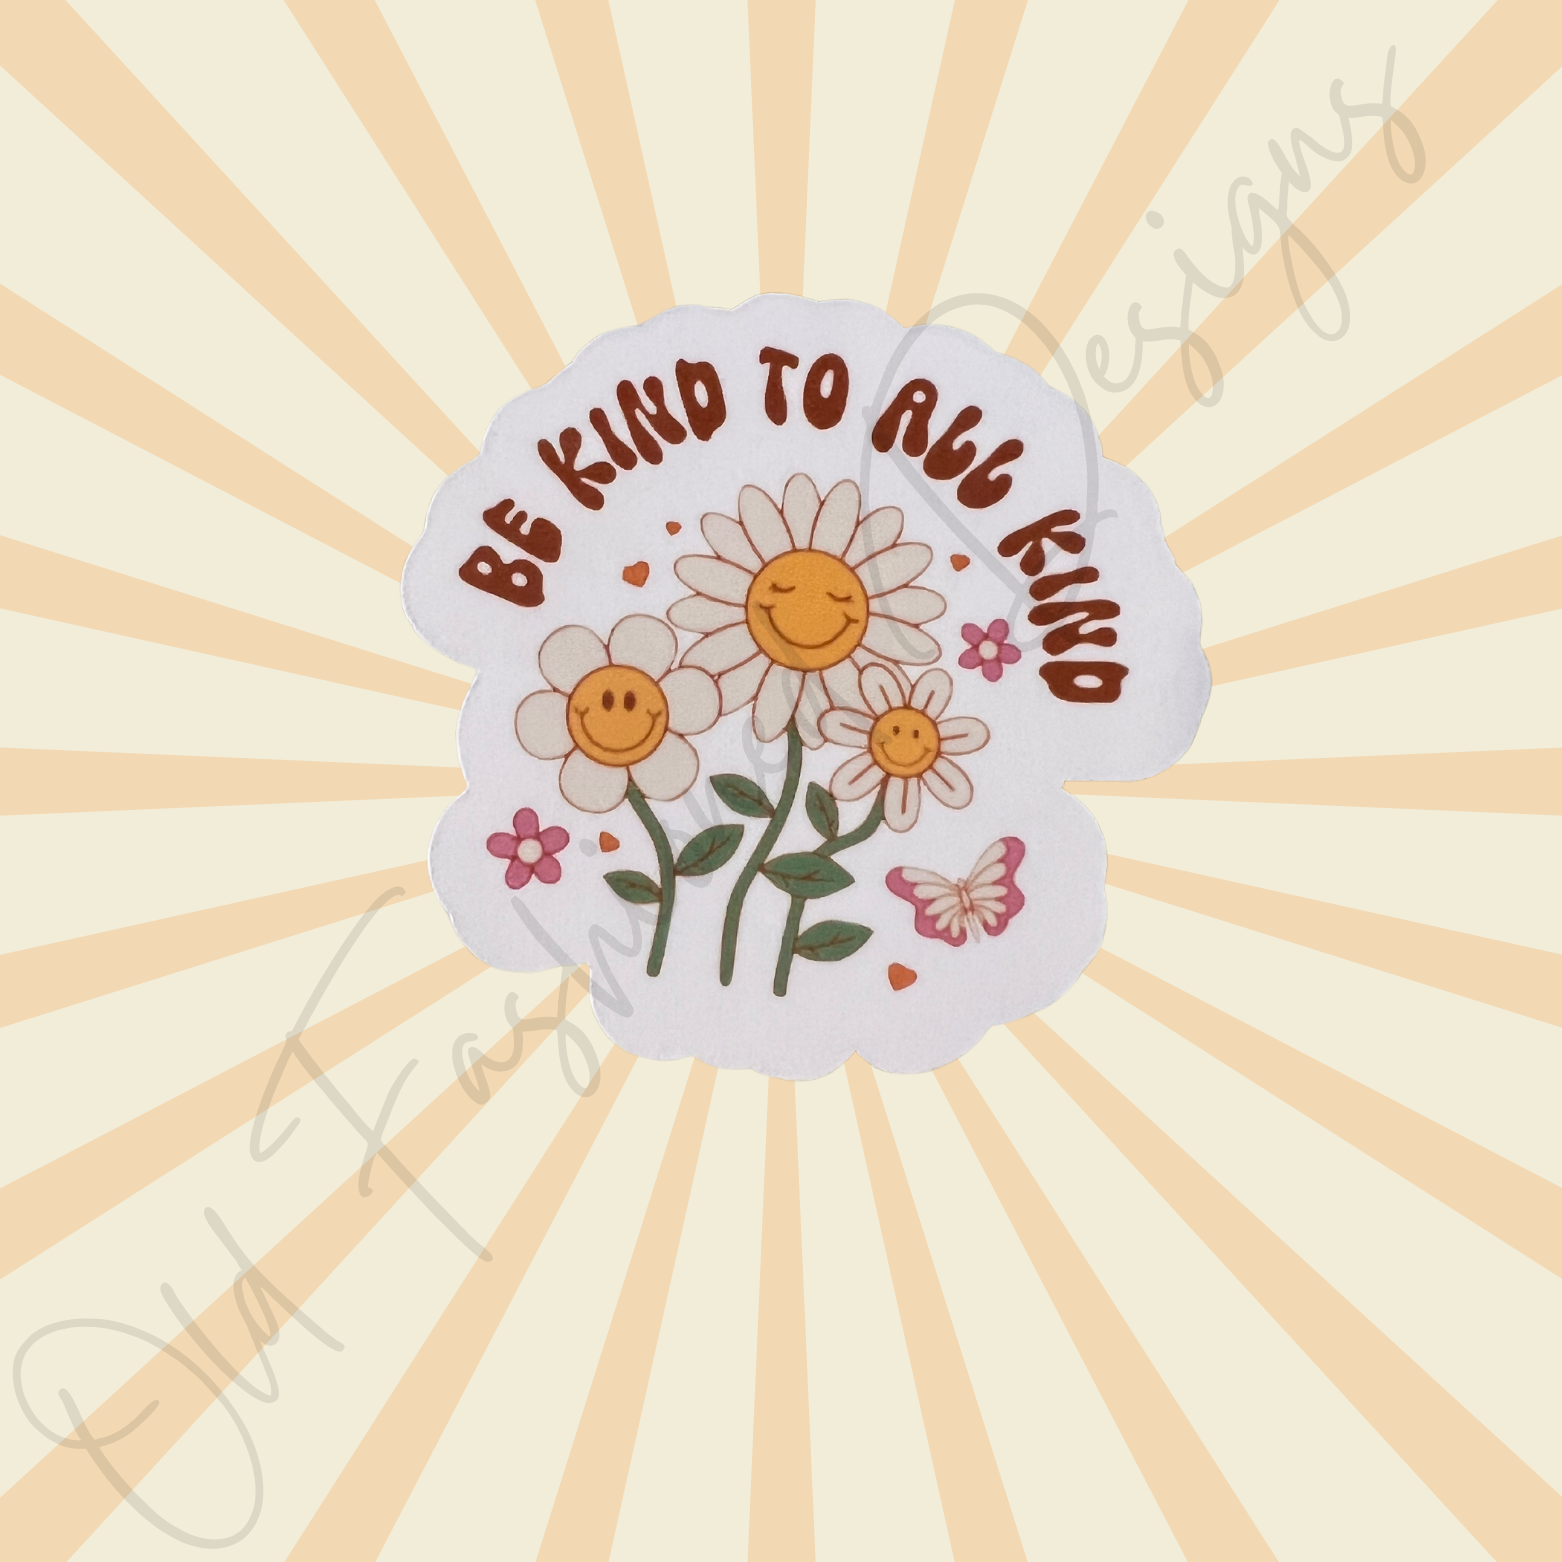 Choose Kindness Sticker for Sale by abbyleal  Modern graphic design,  Graphic design, Sticker collection